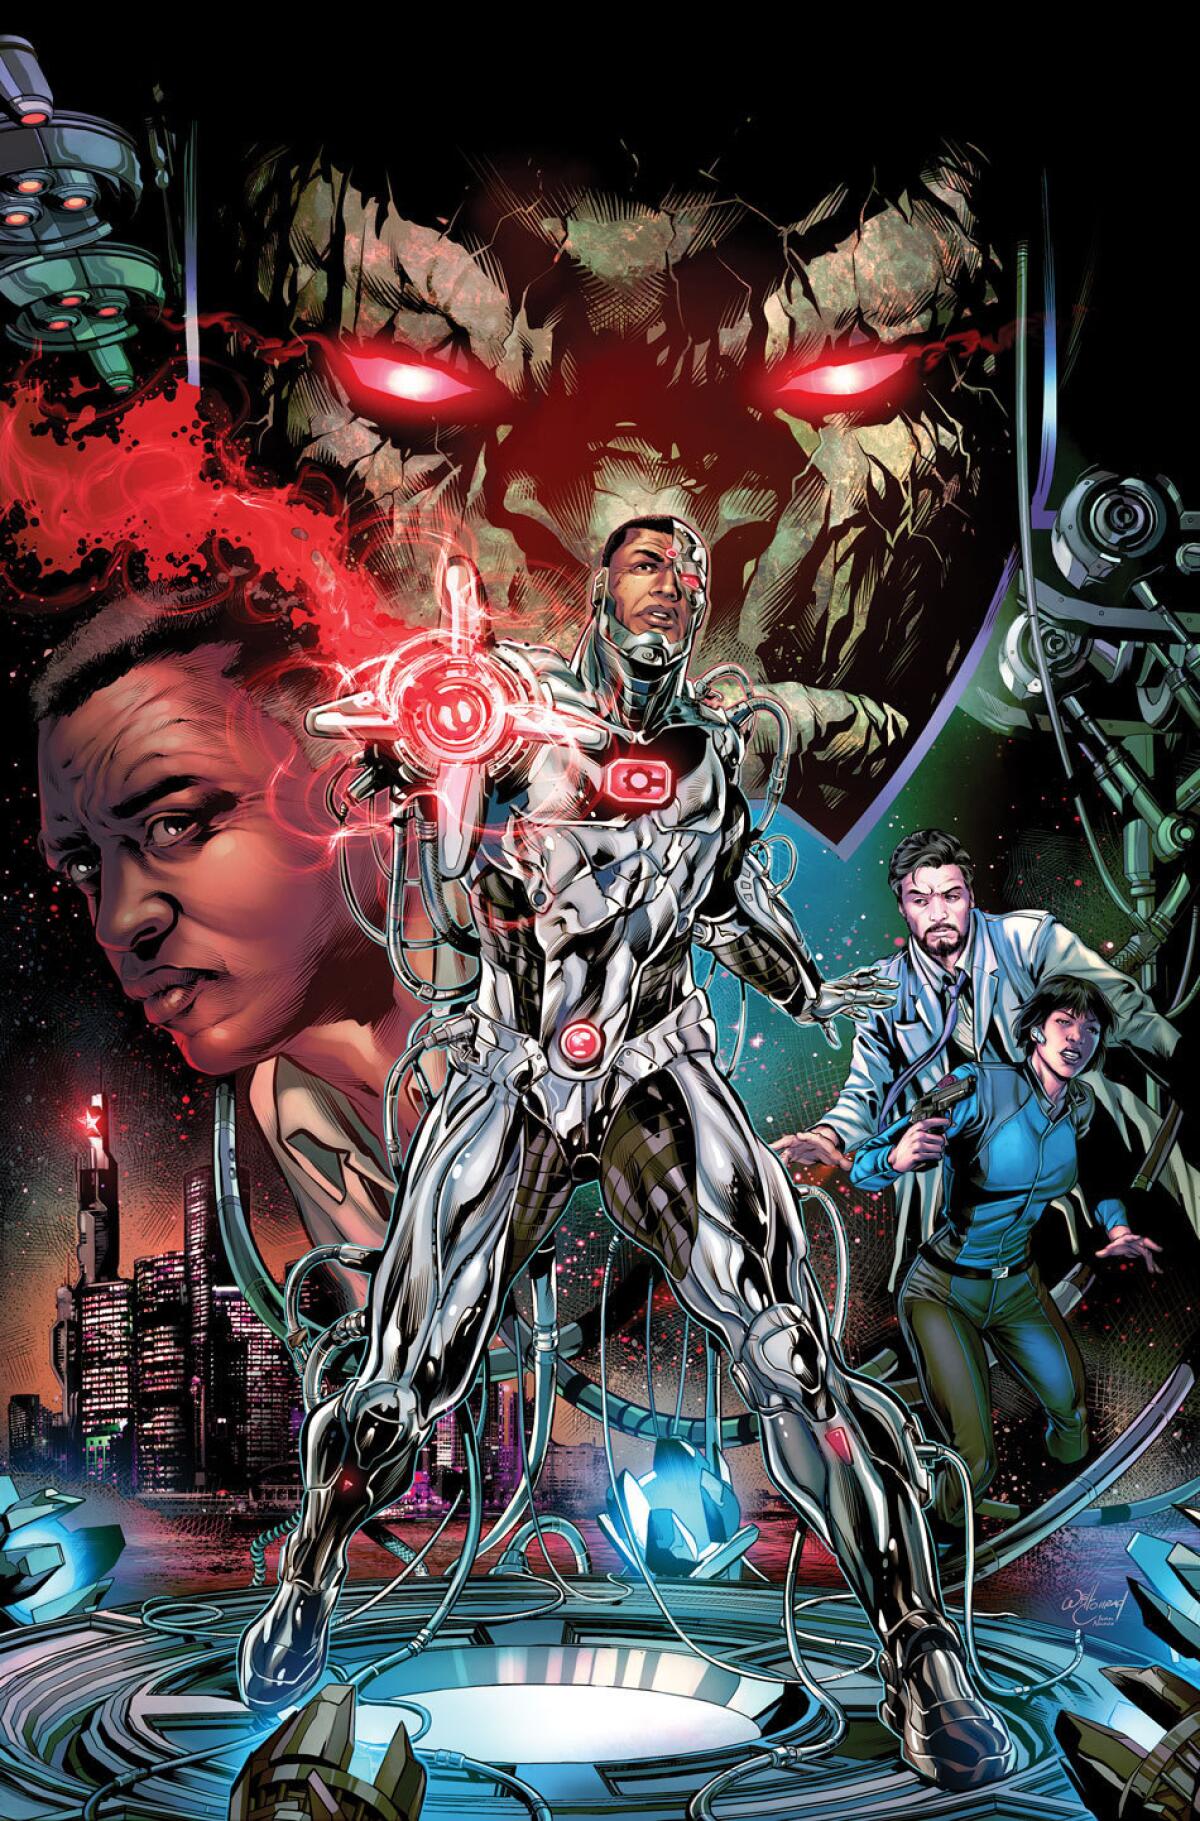 "Cyborg" No. 1. Written by John Semper with art by Will Conad and Paul Pelletier. (DC Comics)